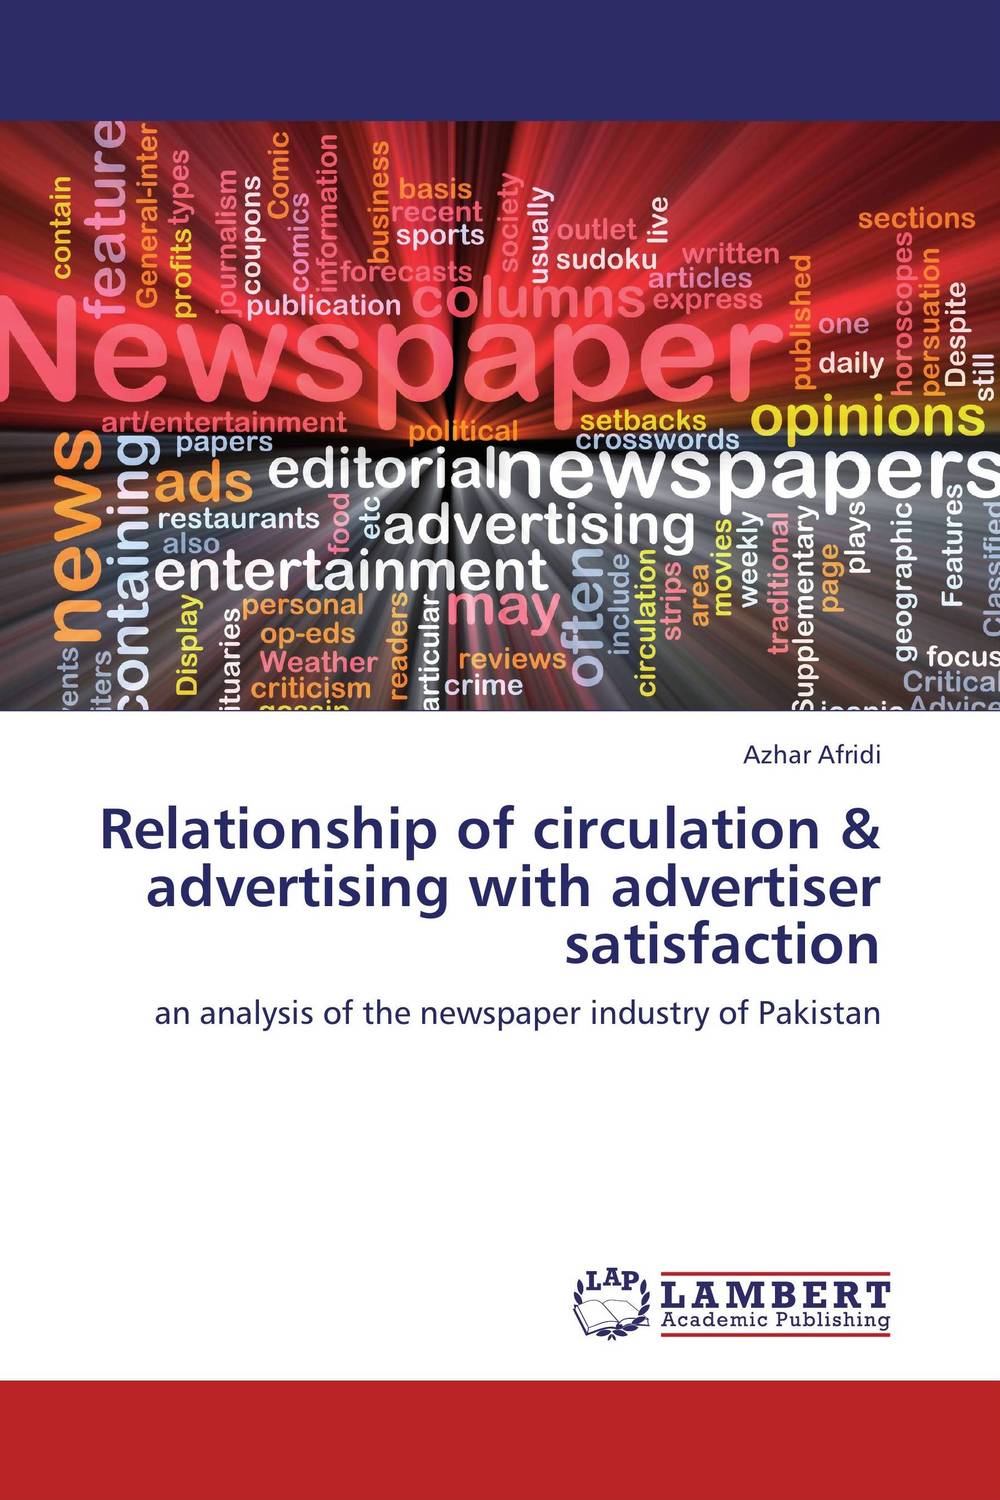 Relationship of circulation & advertising with advertiser satisfaction